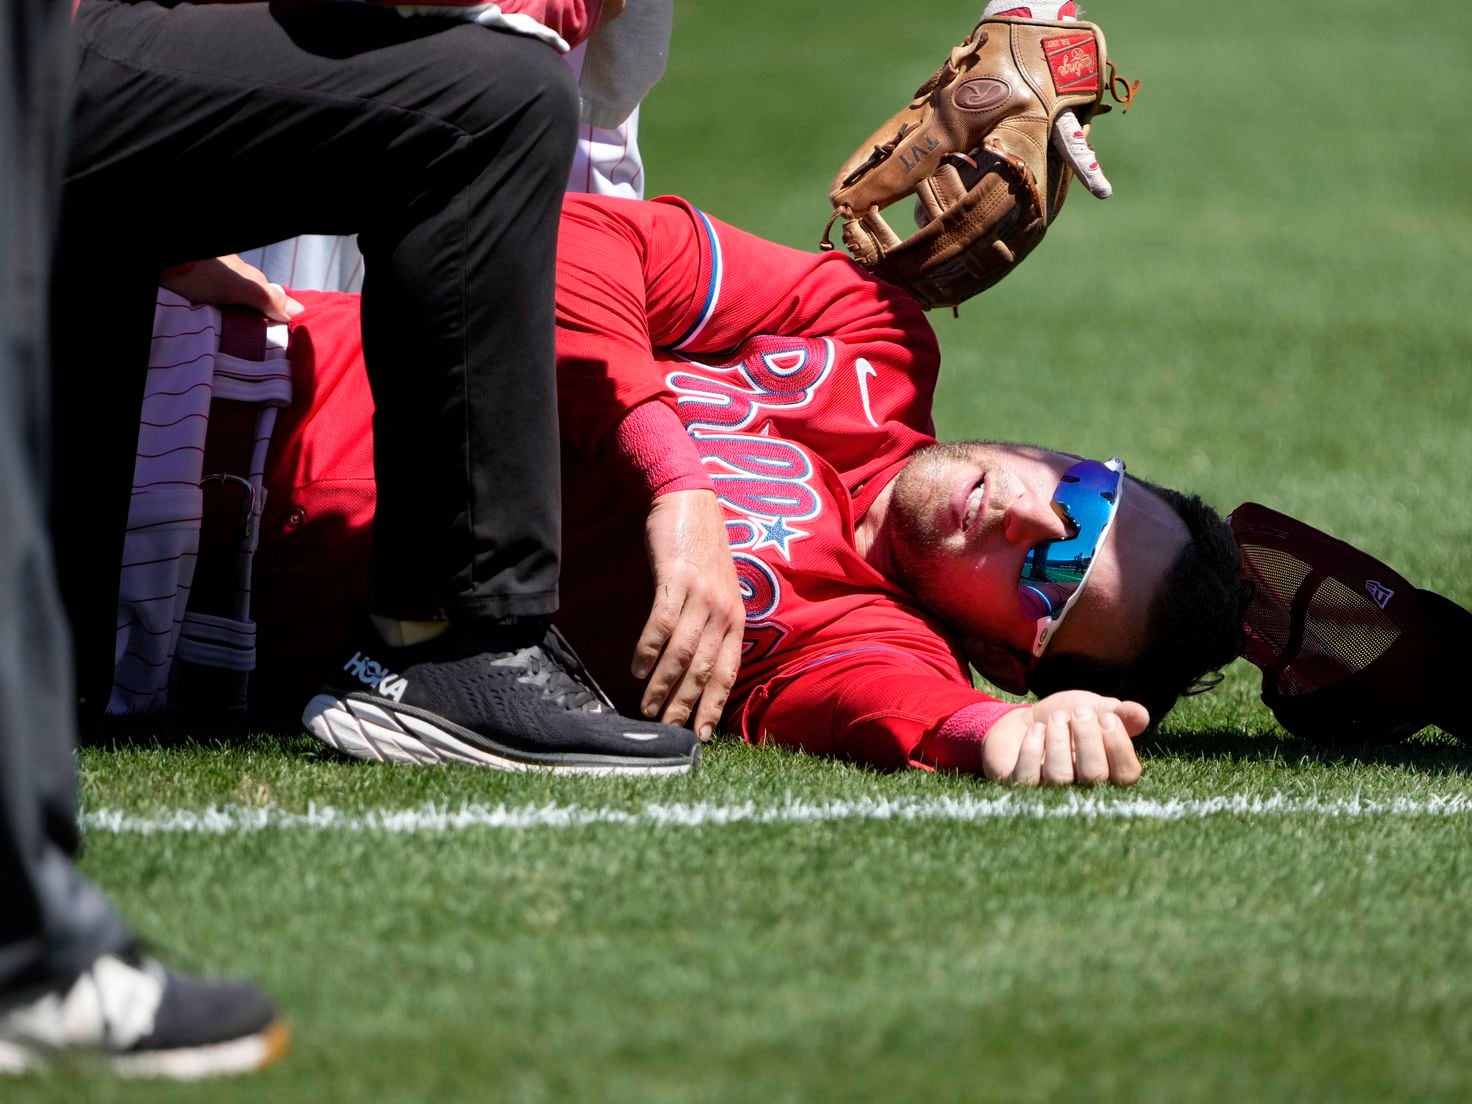 Philadelphia Phillies fans react to Rhys Hoskins being carted off